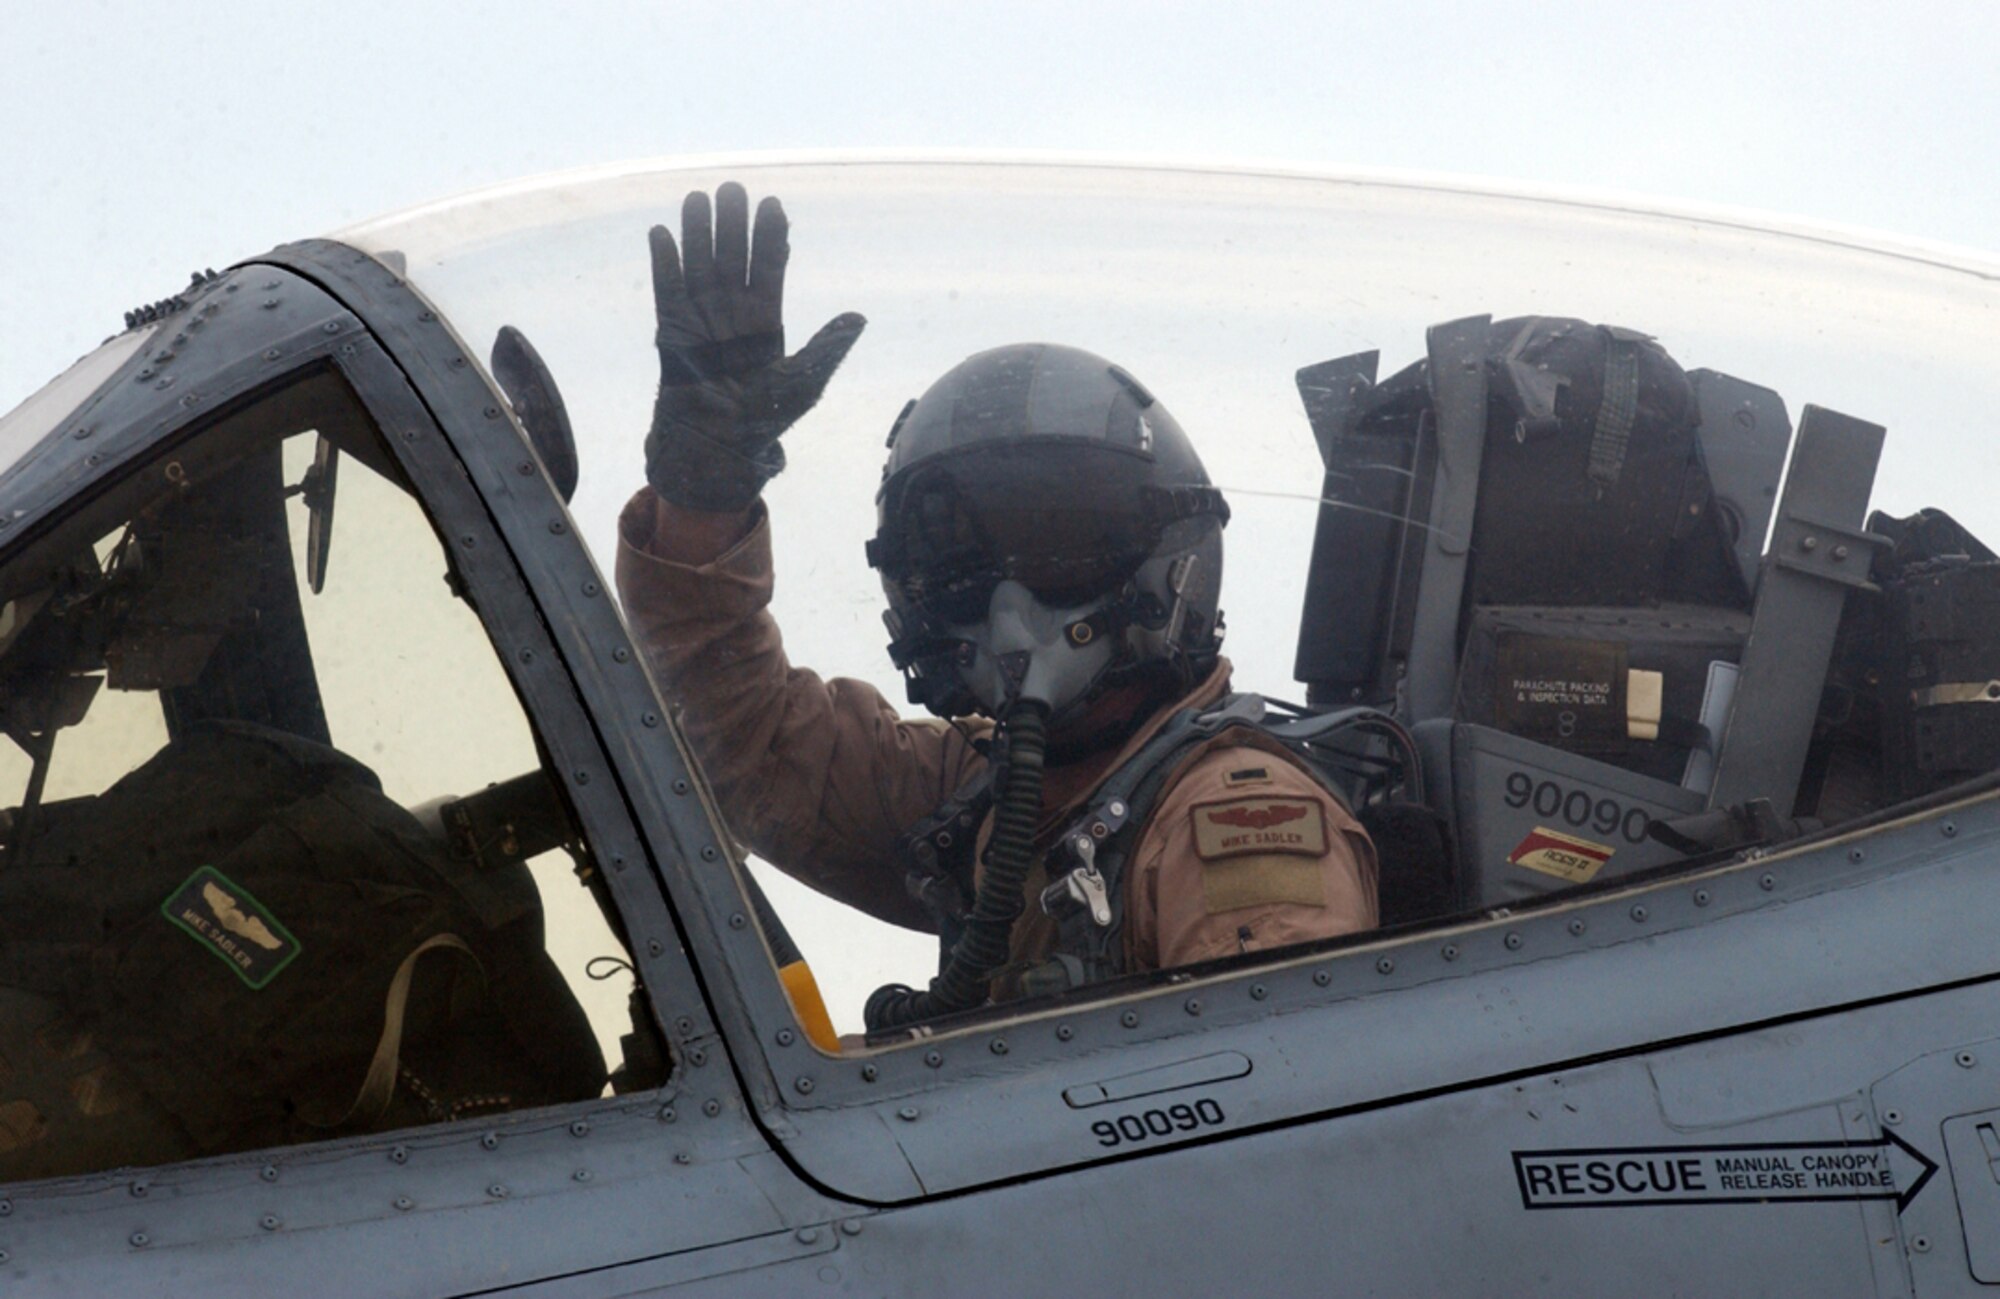 OPERATION IRAQI FREEDOM -- Then 1st Lt., now Capt. Mike Sadler, a pilot with the 442nd Fighter Wing, waves at his crew chief during his taxi to the runway to launch his A-10 on a combat mission over Iraq on April 18, 2003.  The 442nd is from Whiteman Air Force Base, Mo., and was deployed to Tallil and Kirkuk Air Bases in southern Iraq.   Air Force Reservists who were on this deployment were recently awarded the Air Force Outstanding Unit Award with a Valor Device. (U.S. Air Force photo by Master Sgt. Terry L. Blevins)